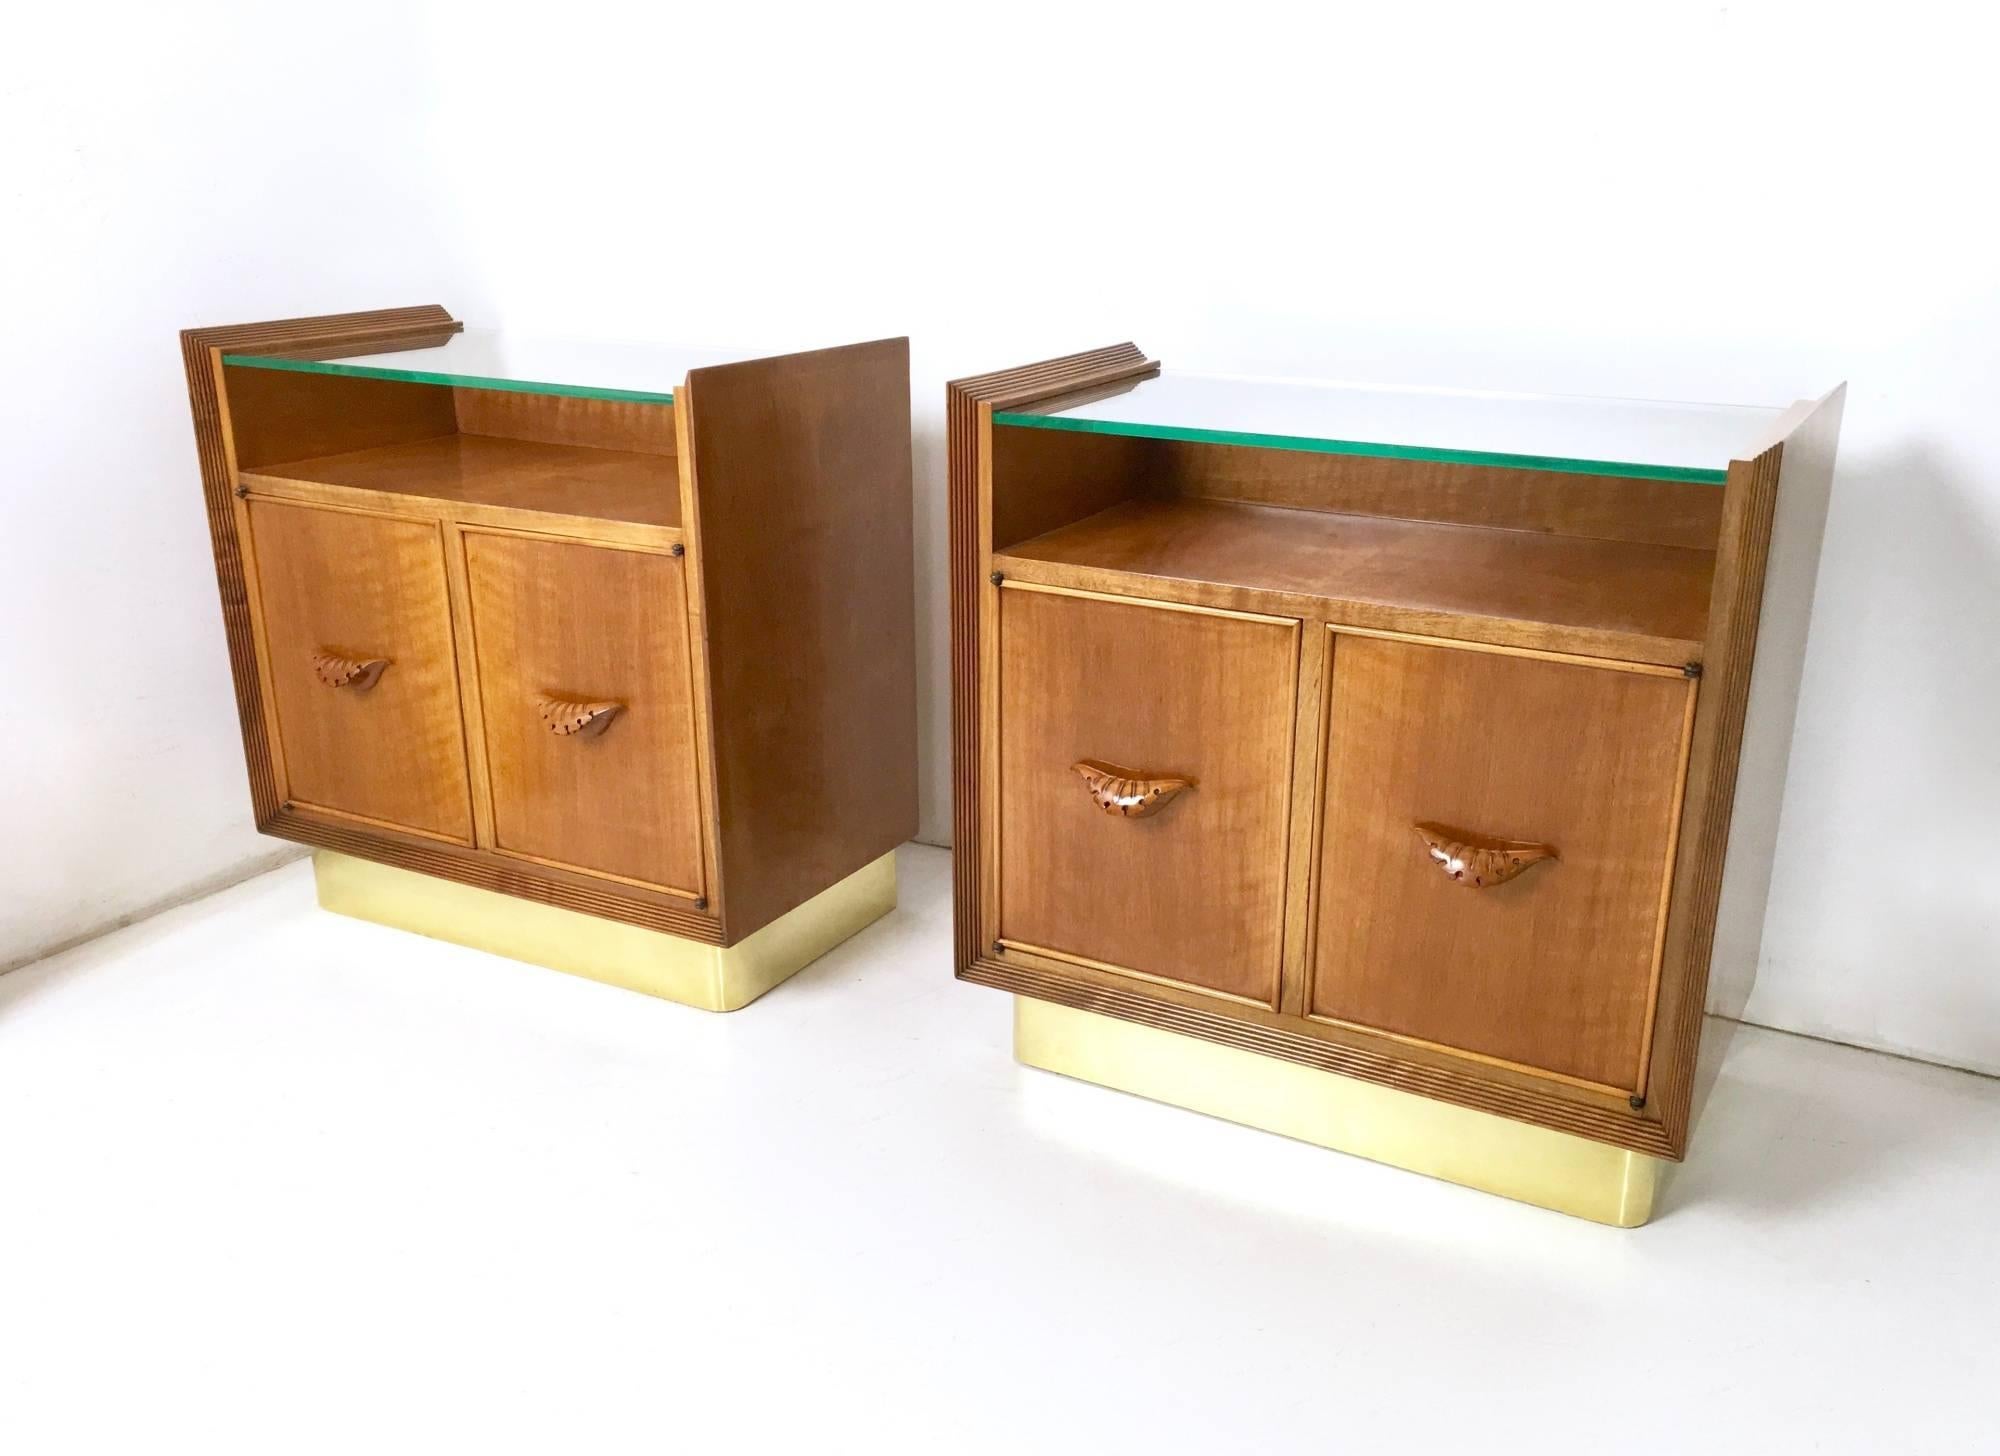 These beautiful nightstands are ascribable to Osvaldo Borsani and are made in walnut and brass.
They feature a crystal top and carved handles.
In perfect condition as they have been perfectly restored.
These stunning nightstands are ready to